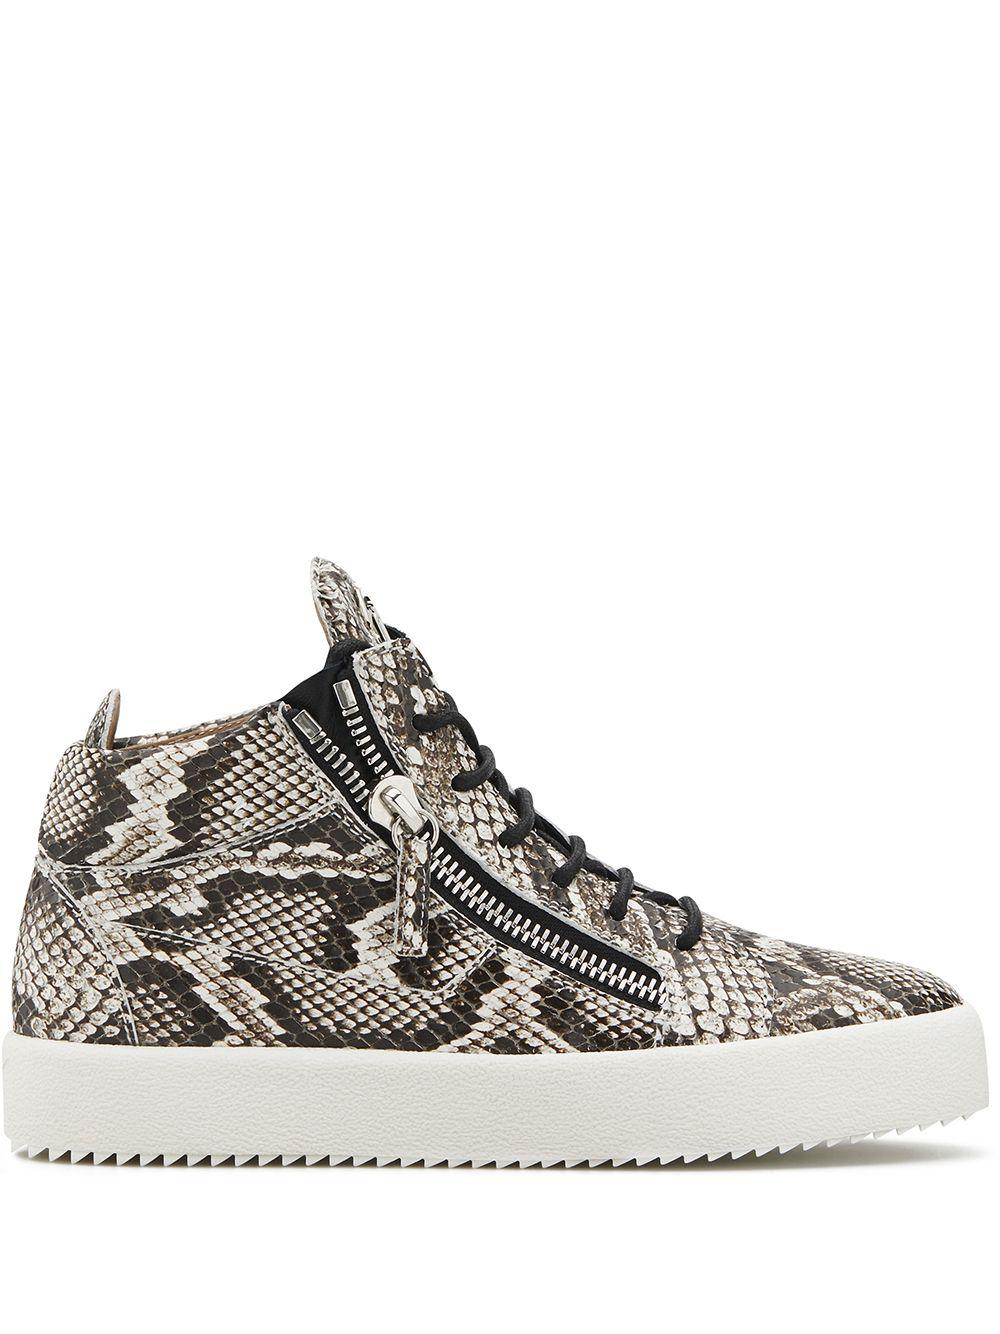 Giuseppe Zanotti Leather Kriss Python-effect Sneakers in Brown - Lyst